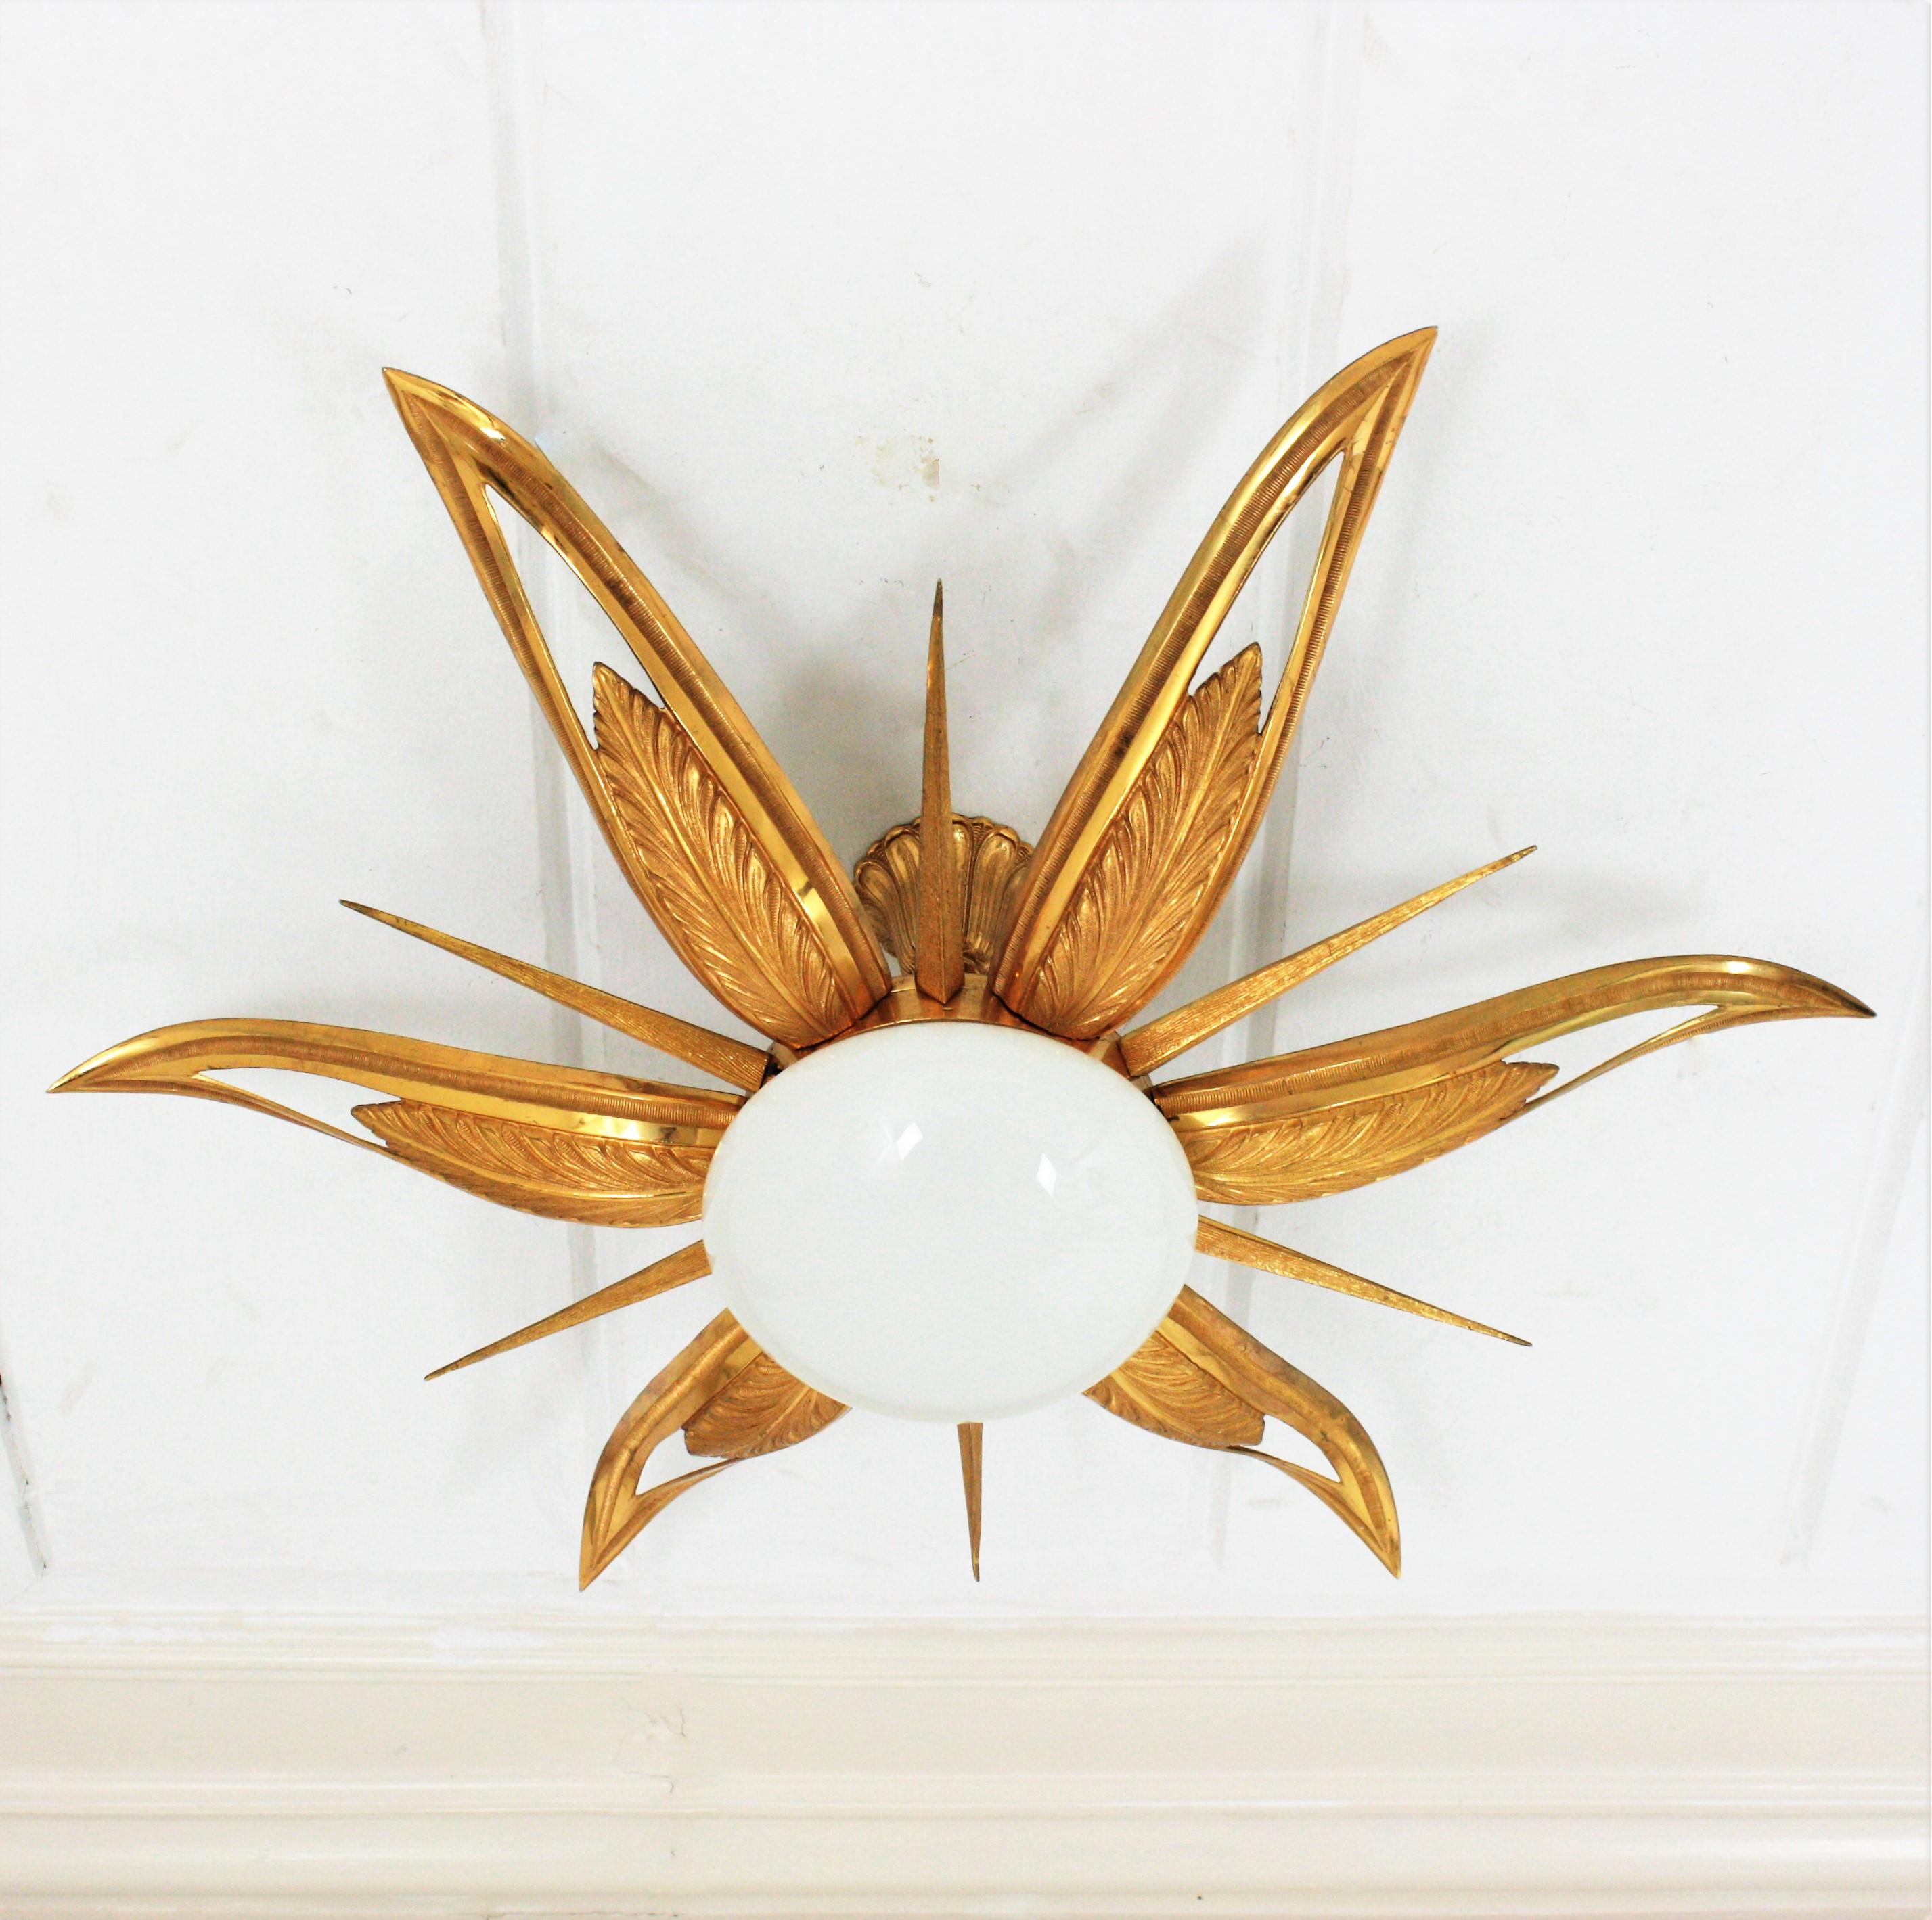 An exceptional Art Deco starburst shaped engraved and molded bronze ceiling lamp, France, 1930s-1940s.
This flush mount features a flower burst or starburst with 6 large leaves or rays, 6 pointed smaller and thinner rays and an opaline white glass